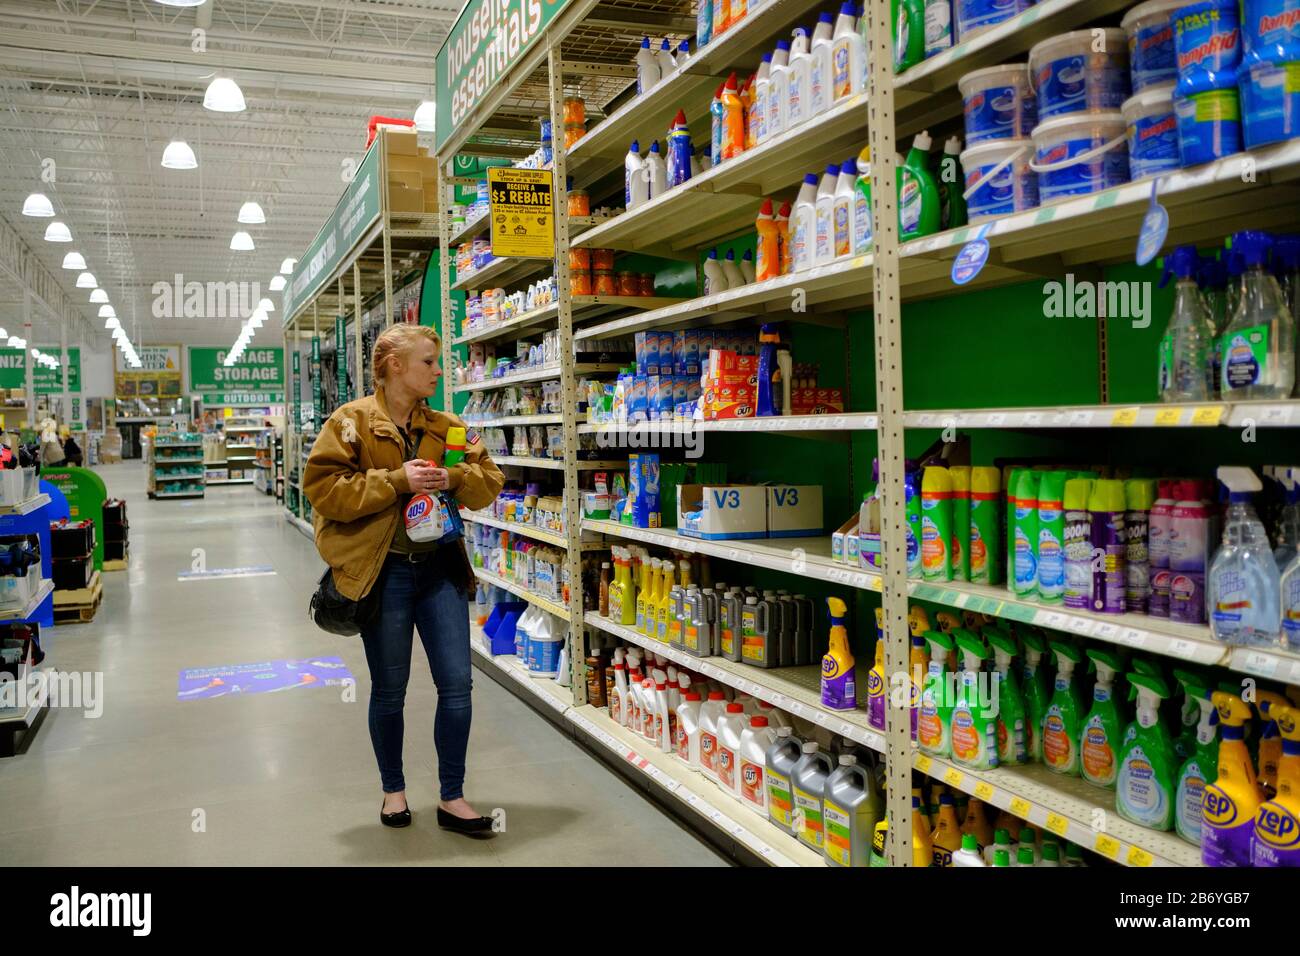 03112020 - Bloomington, Indiana, USA:  A woman shops for disinfectants at Menards on the day World Health Organization declared Coronavirus to be a pandemic. Toilet paper, wipes, protective breathing masks, and other items are either sold out at local stores, or are in short supply. Stock Photo